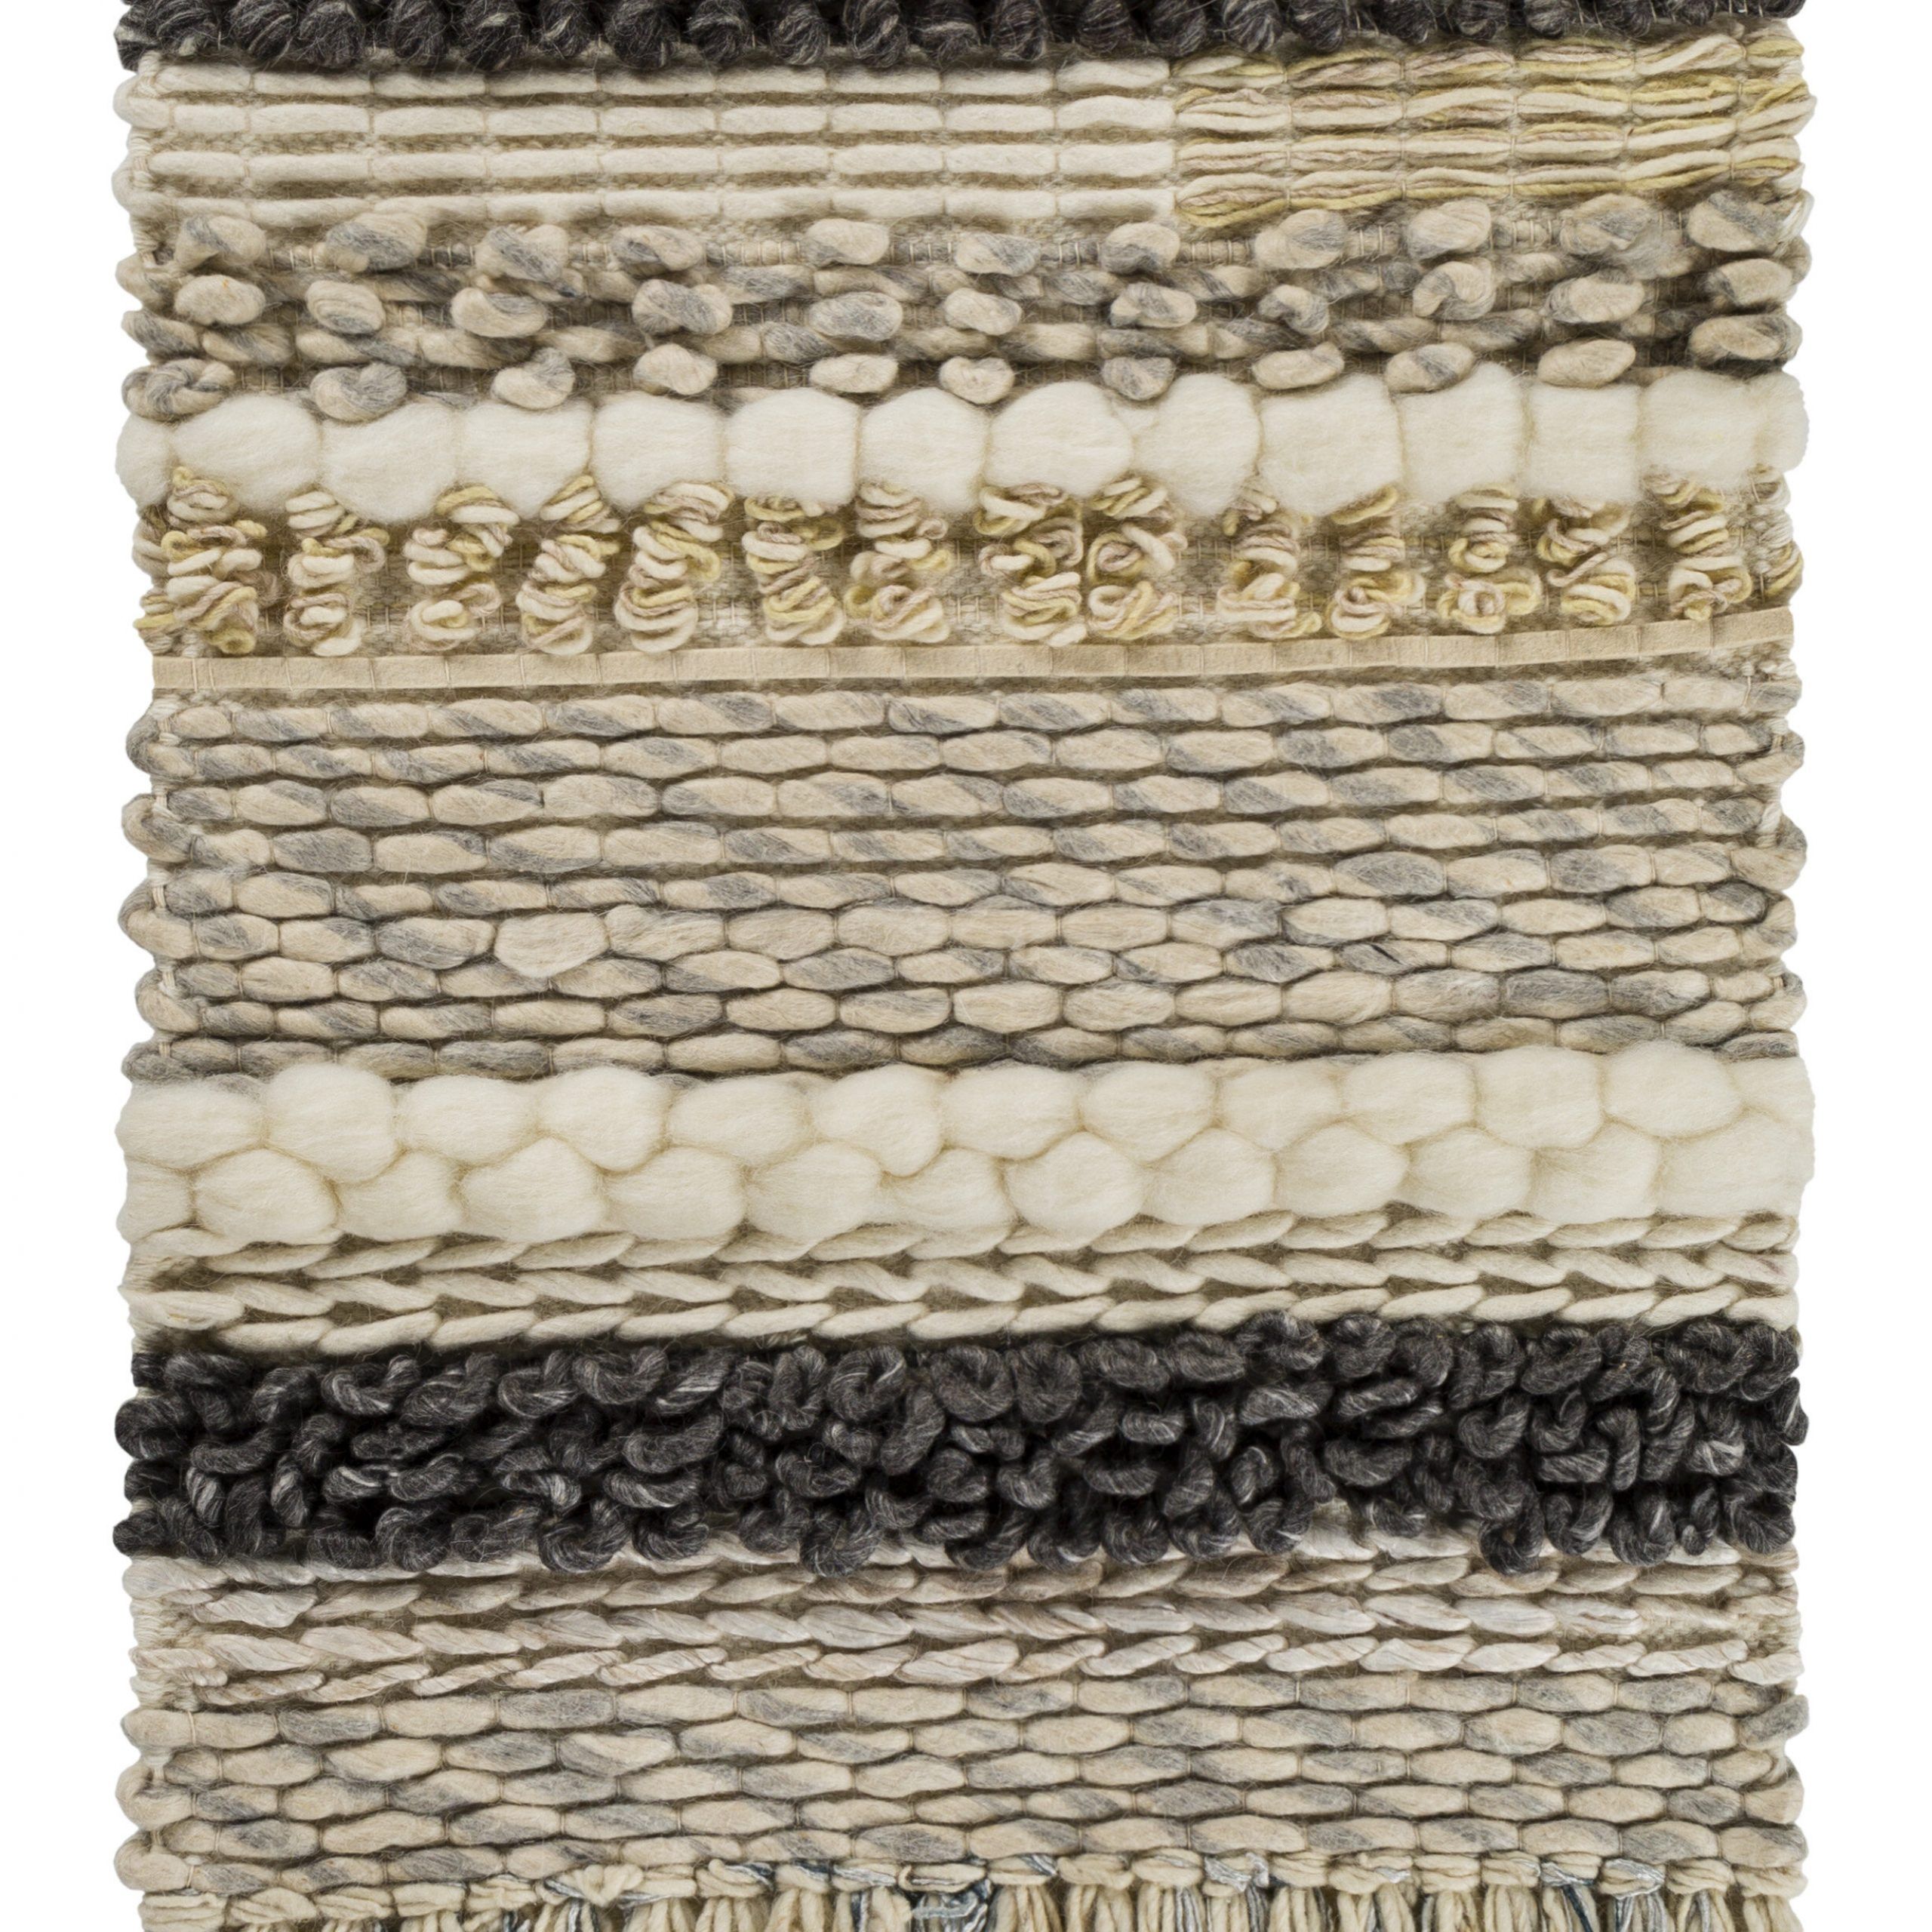 Teresina Wool And Viscose Wall Hanging With Hanging Accessories Included Throughout 2017 Blended Fabric Ranier Wall Hangings With Hanging Accessories Included (View 4 of 20)